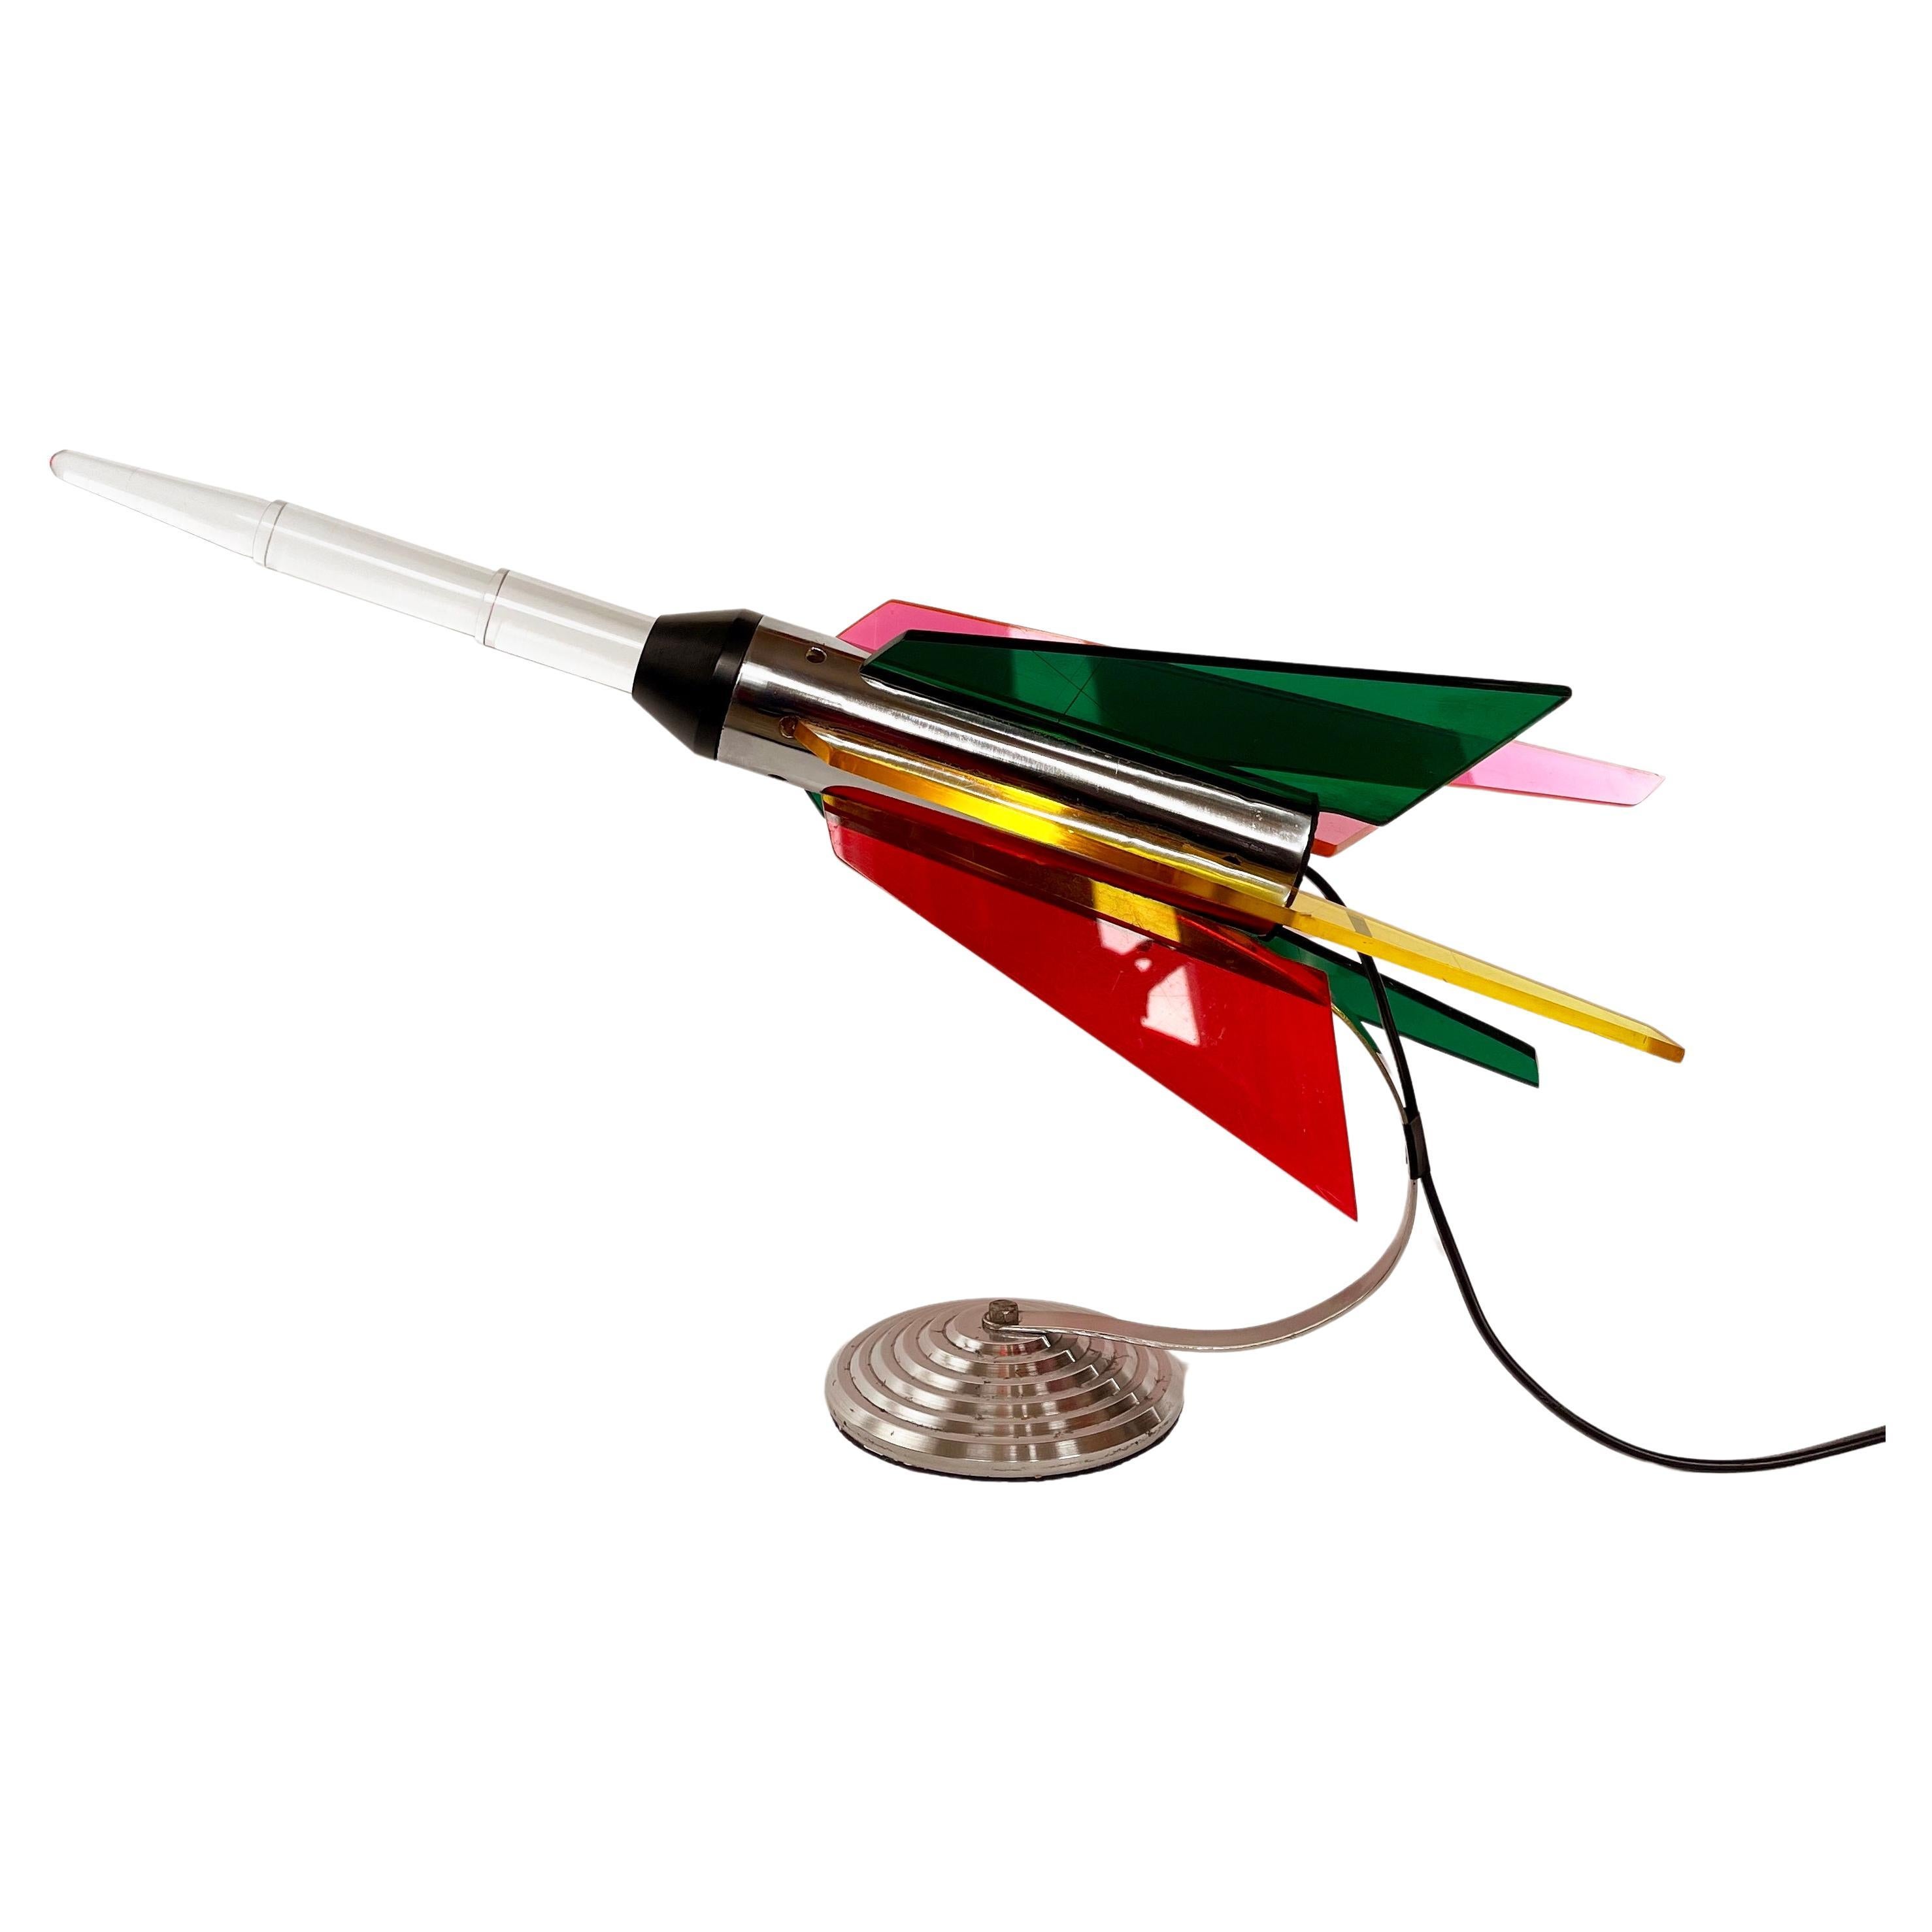 Large 1960s Rocket Table Lamp Chrome & Acrylic, Funky Mid-Century For Sale